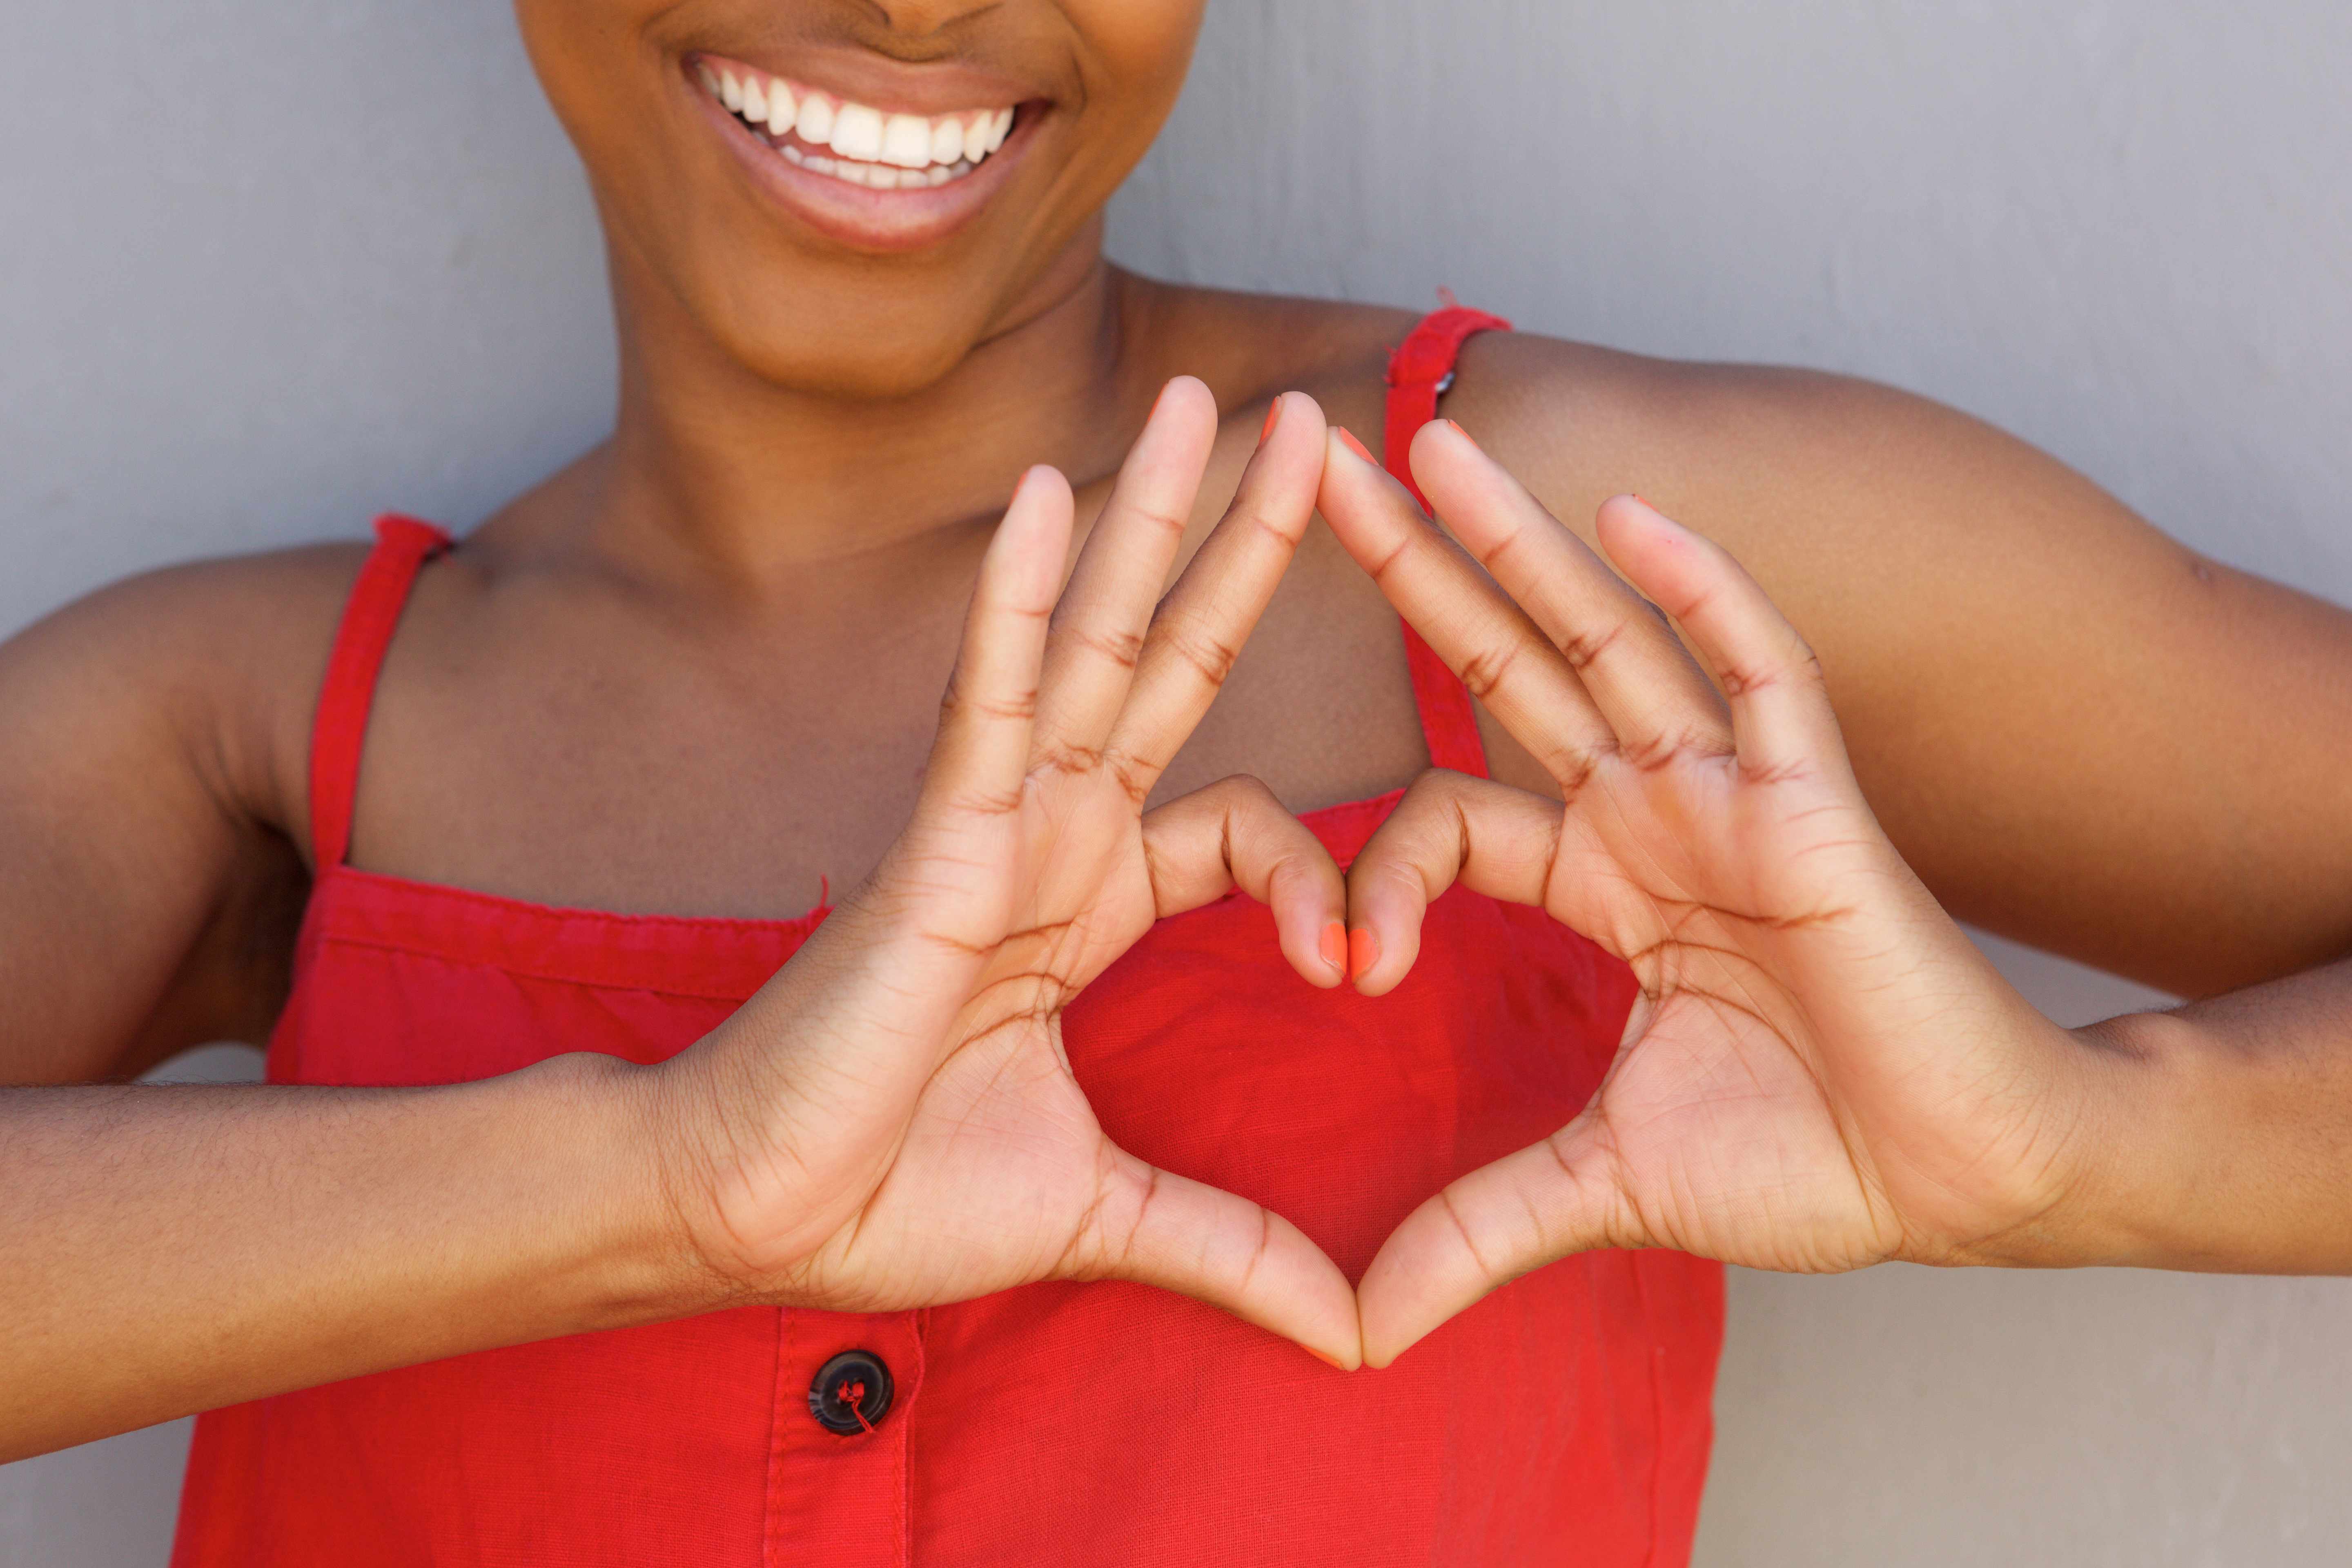 a woman in a red shirt smiling and forming her hands in the shape of a heart